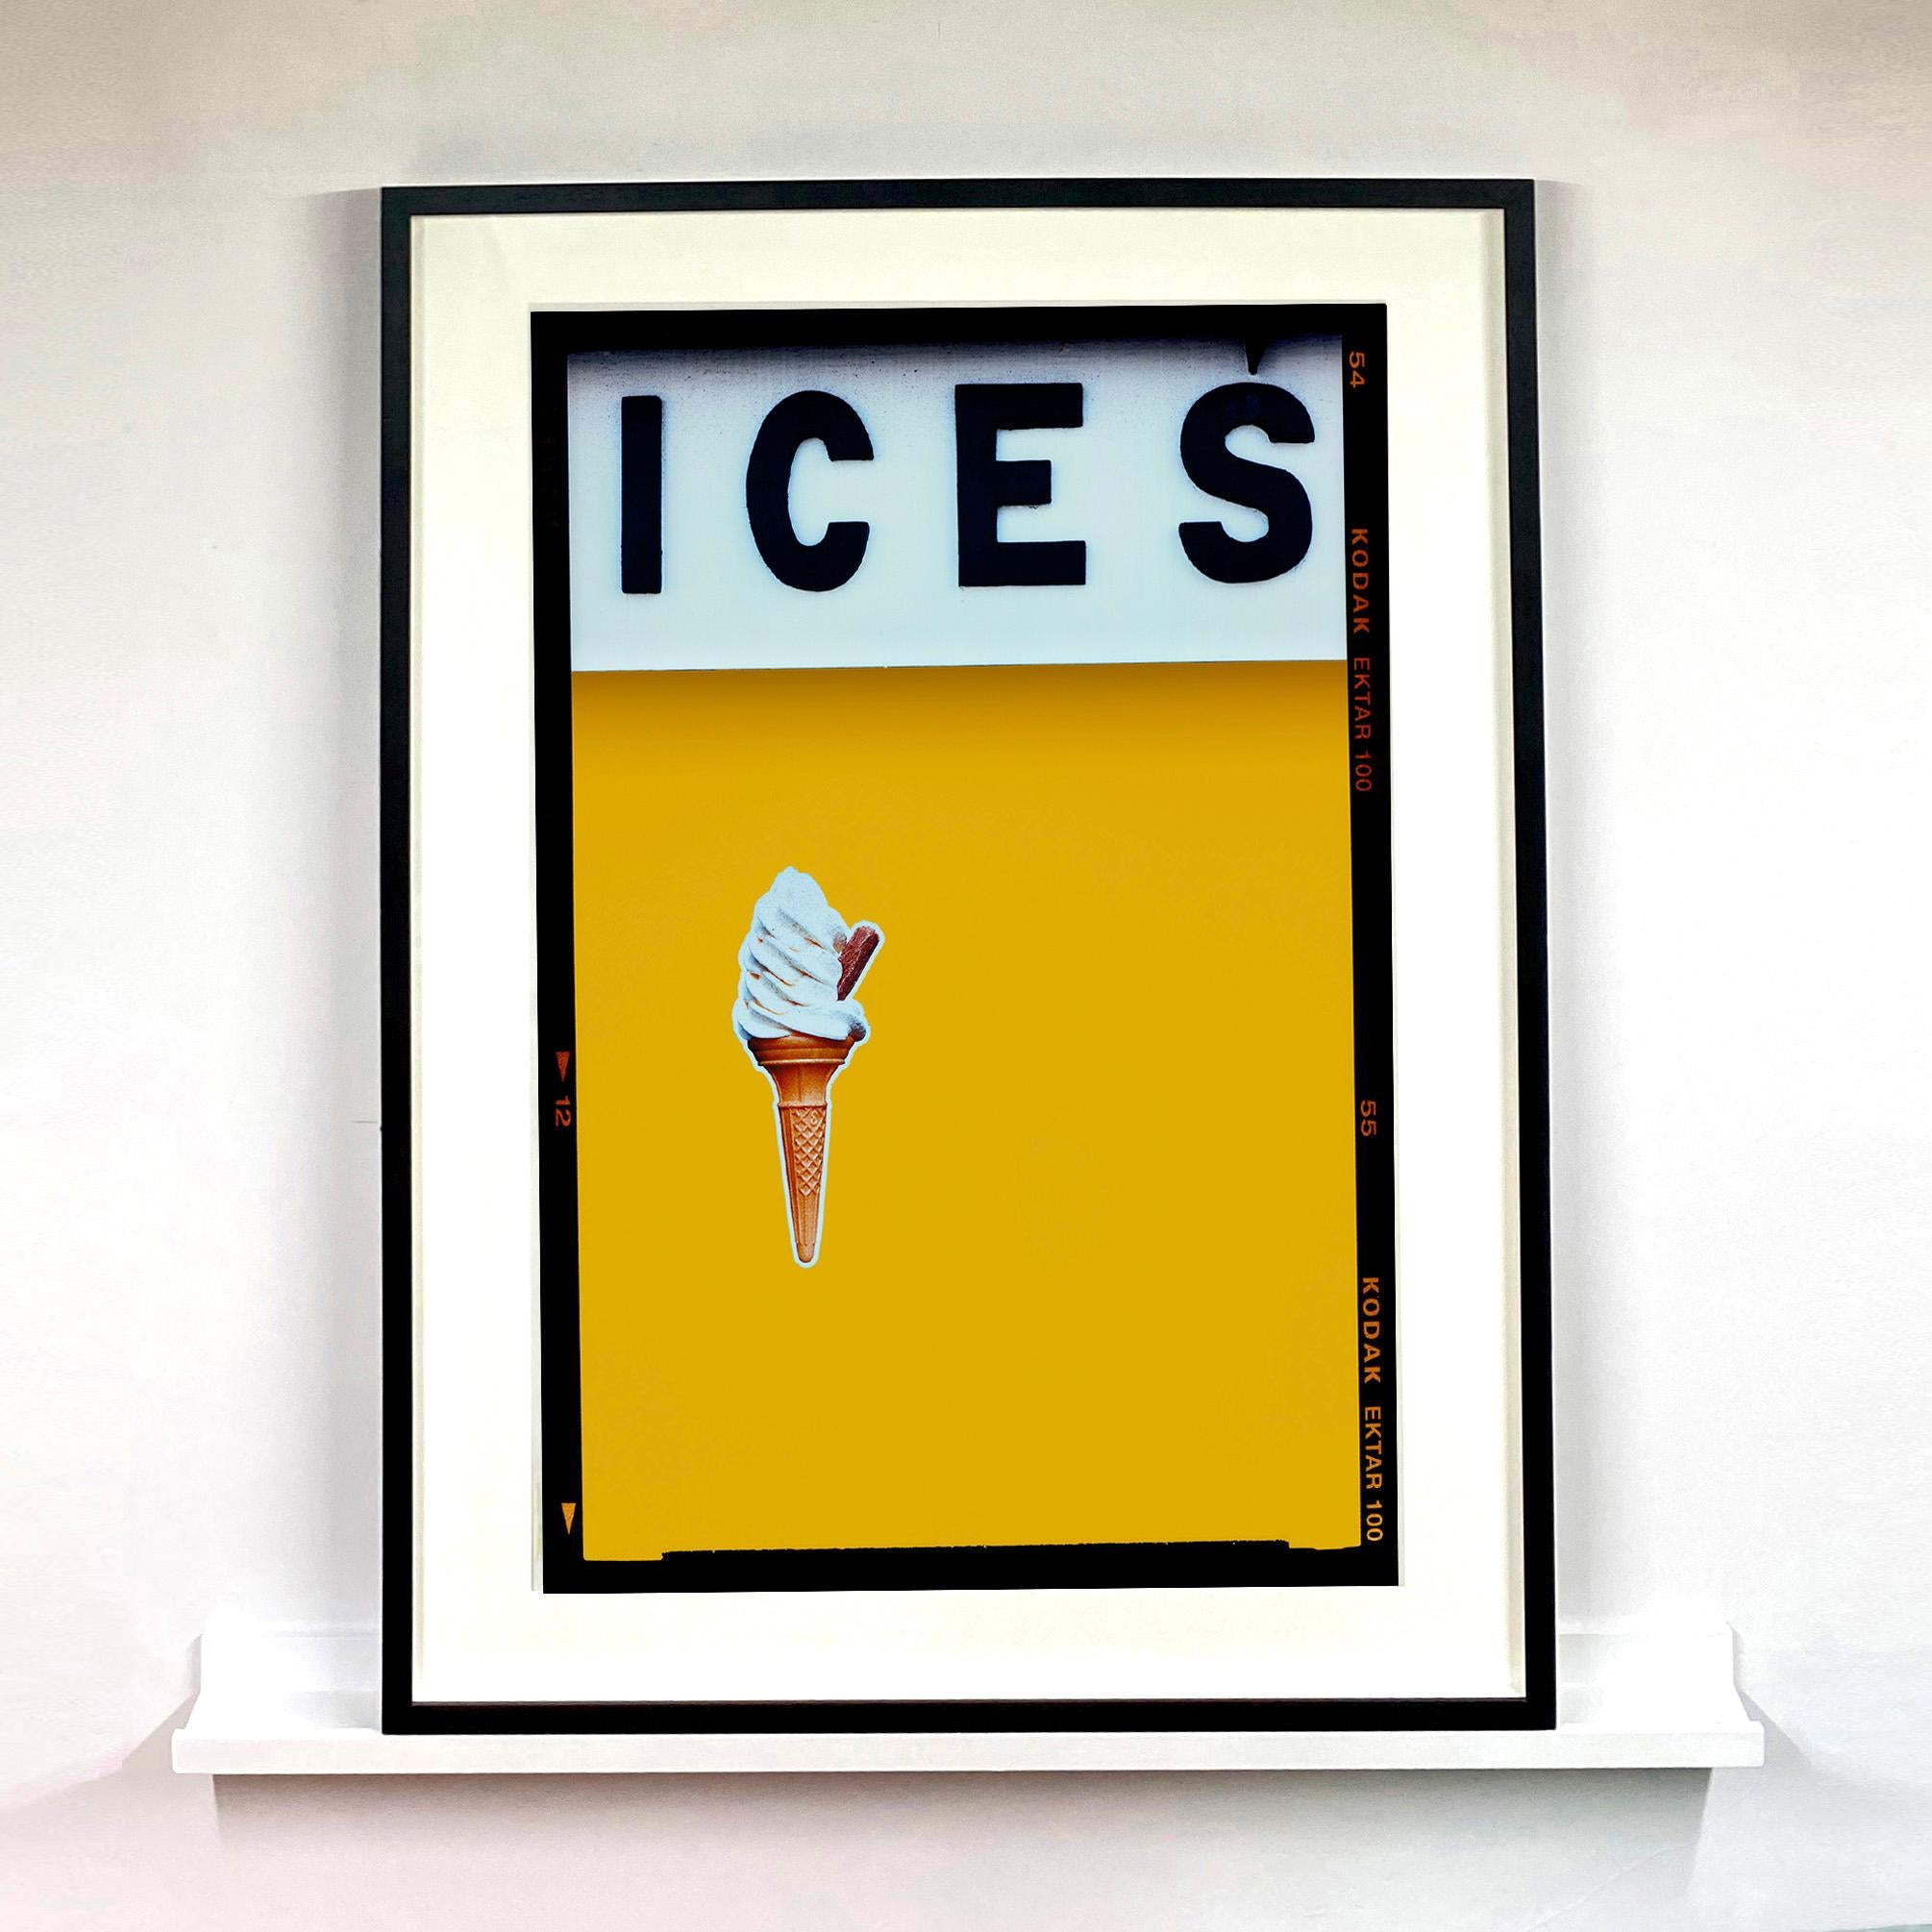 Ices (Mustard), Bexhill-on-Sea - British pop art color photography - Pop Art Print by Richard Heeps